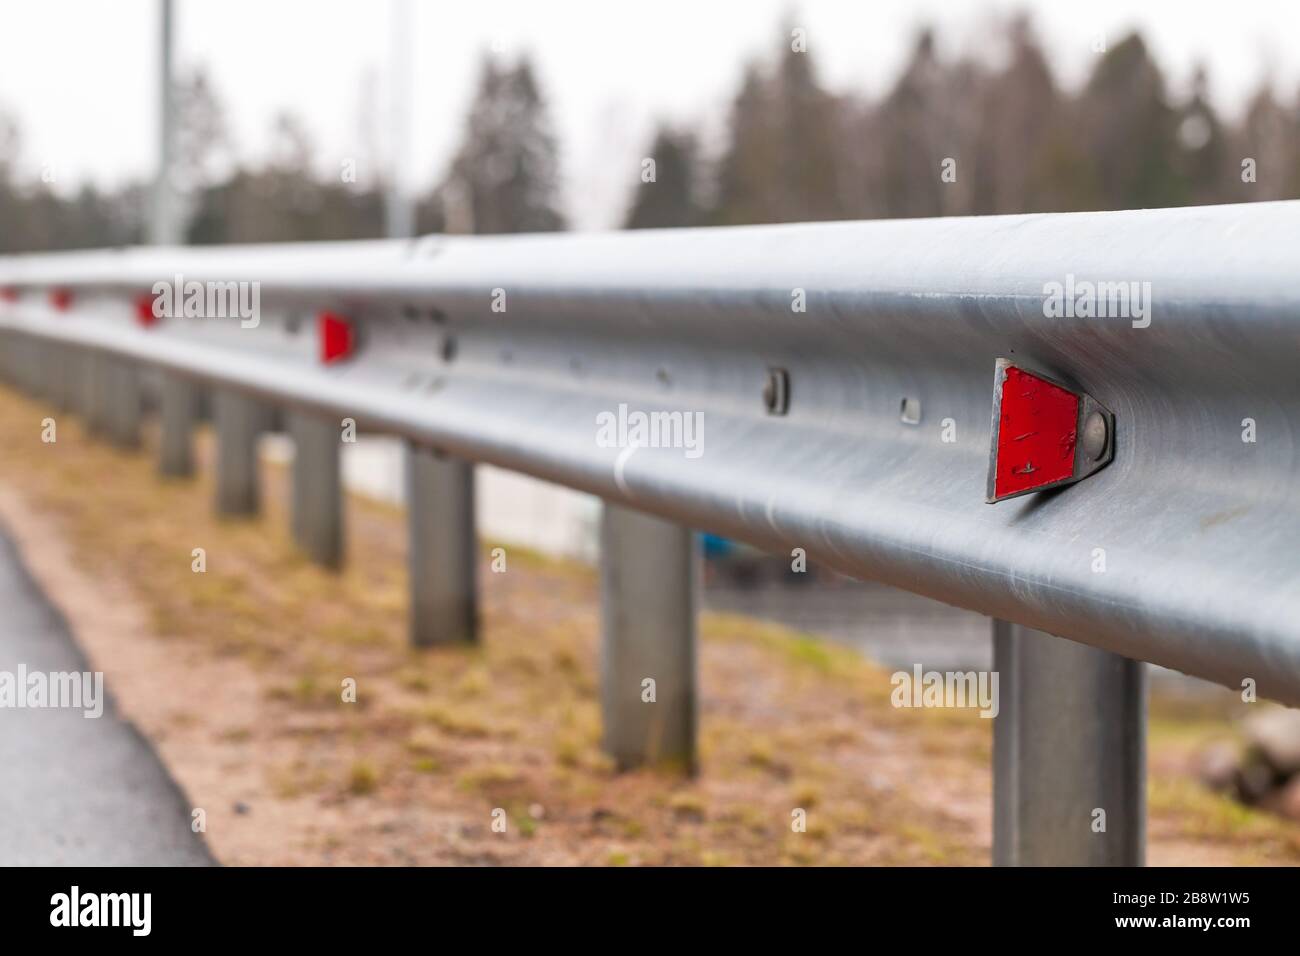 Retro-reflecting optical units are on a metal guardrail. Highway safety equipment, close-up photo with selective focus Stock Photo